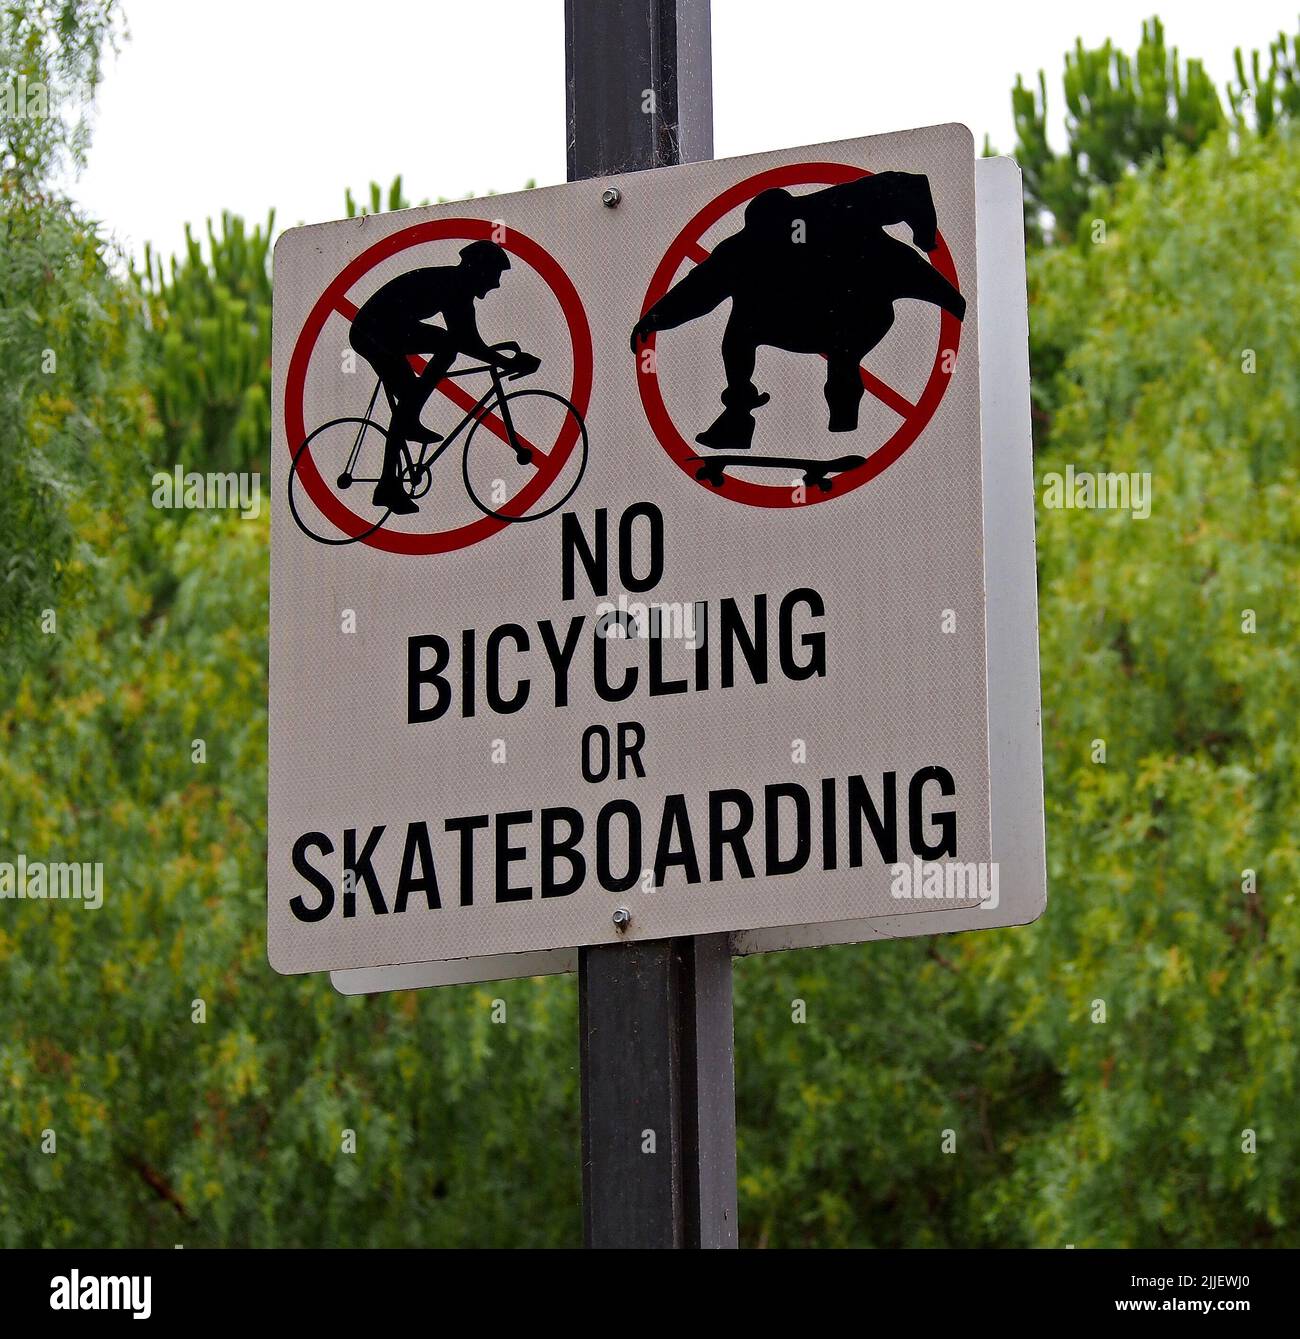 no bicycling or skateboarding sign symbols in William Cann Civic Center in Union City, California Stock Photo